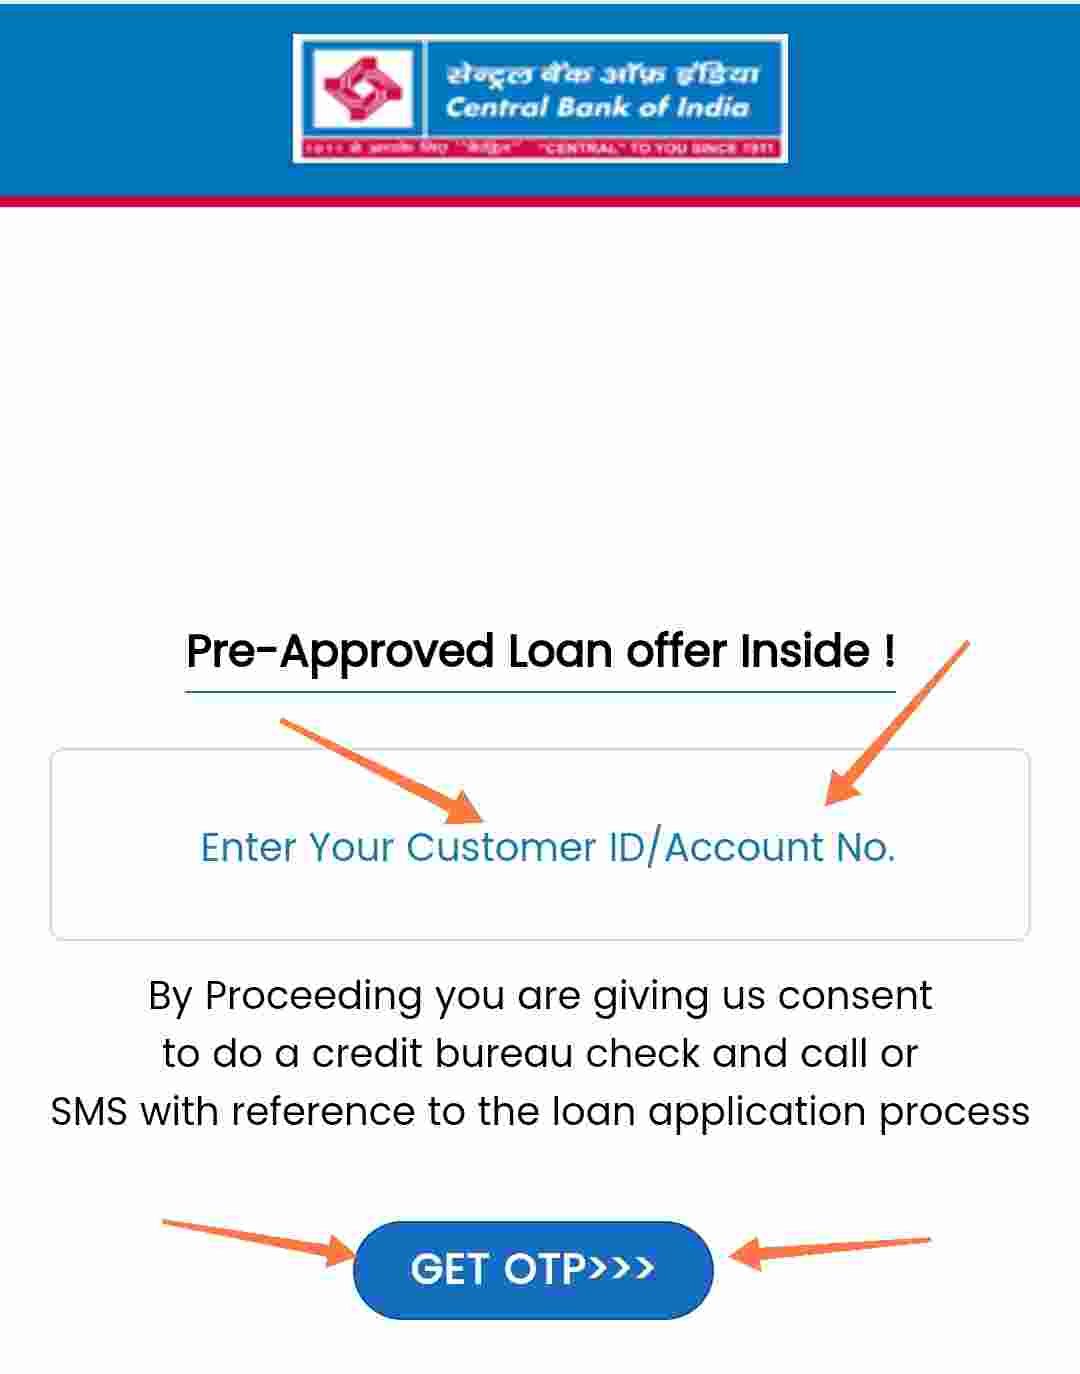 Central Bank of India Pre Approved Personal Loan